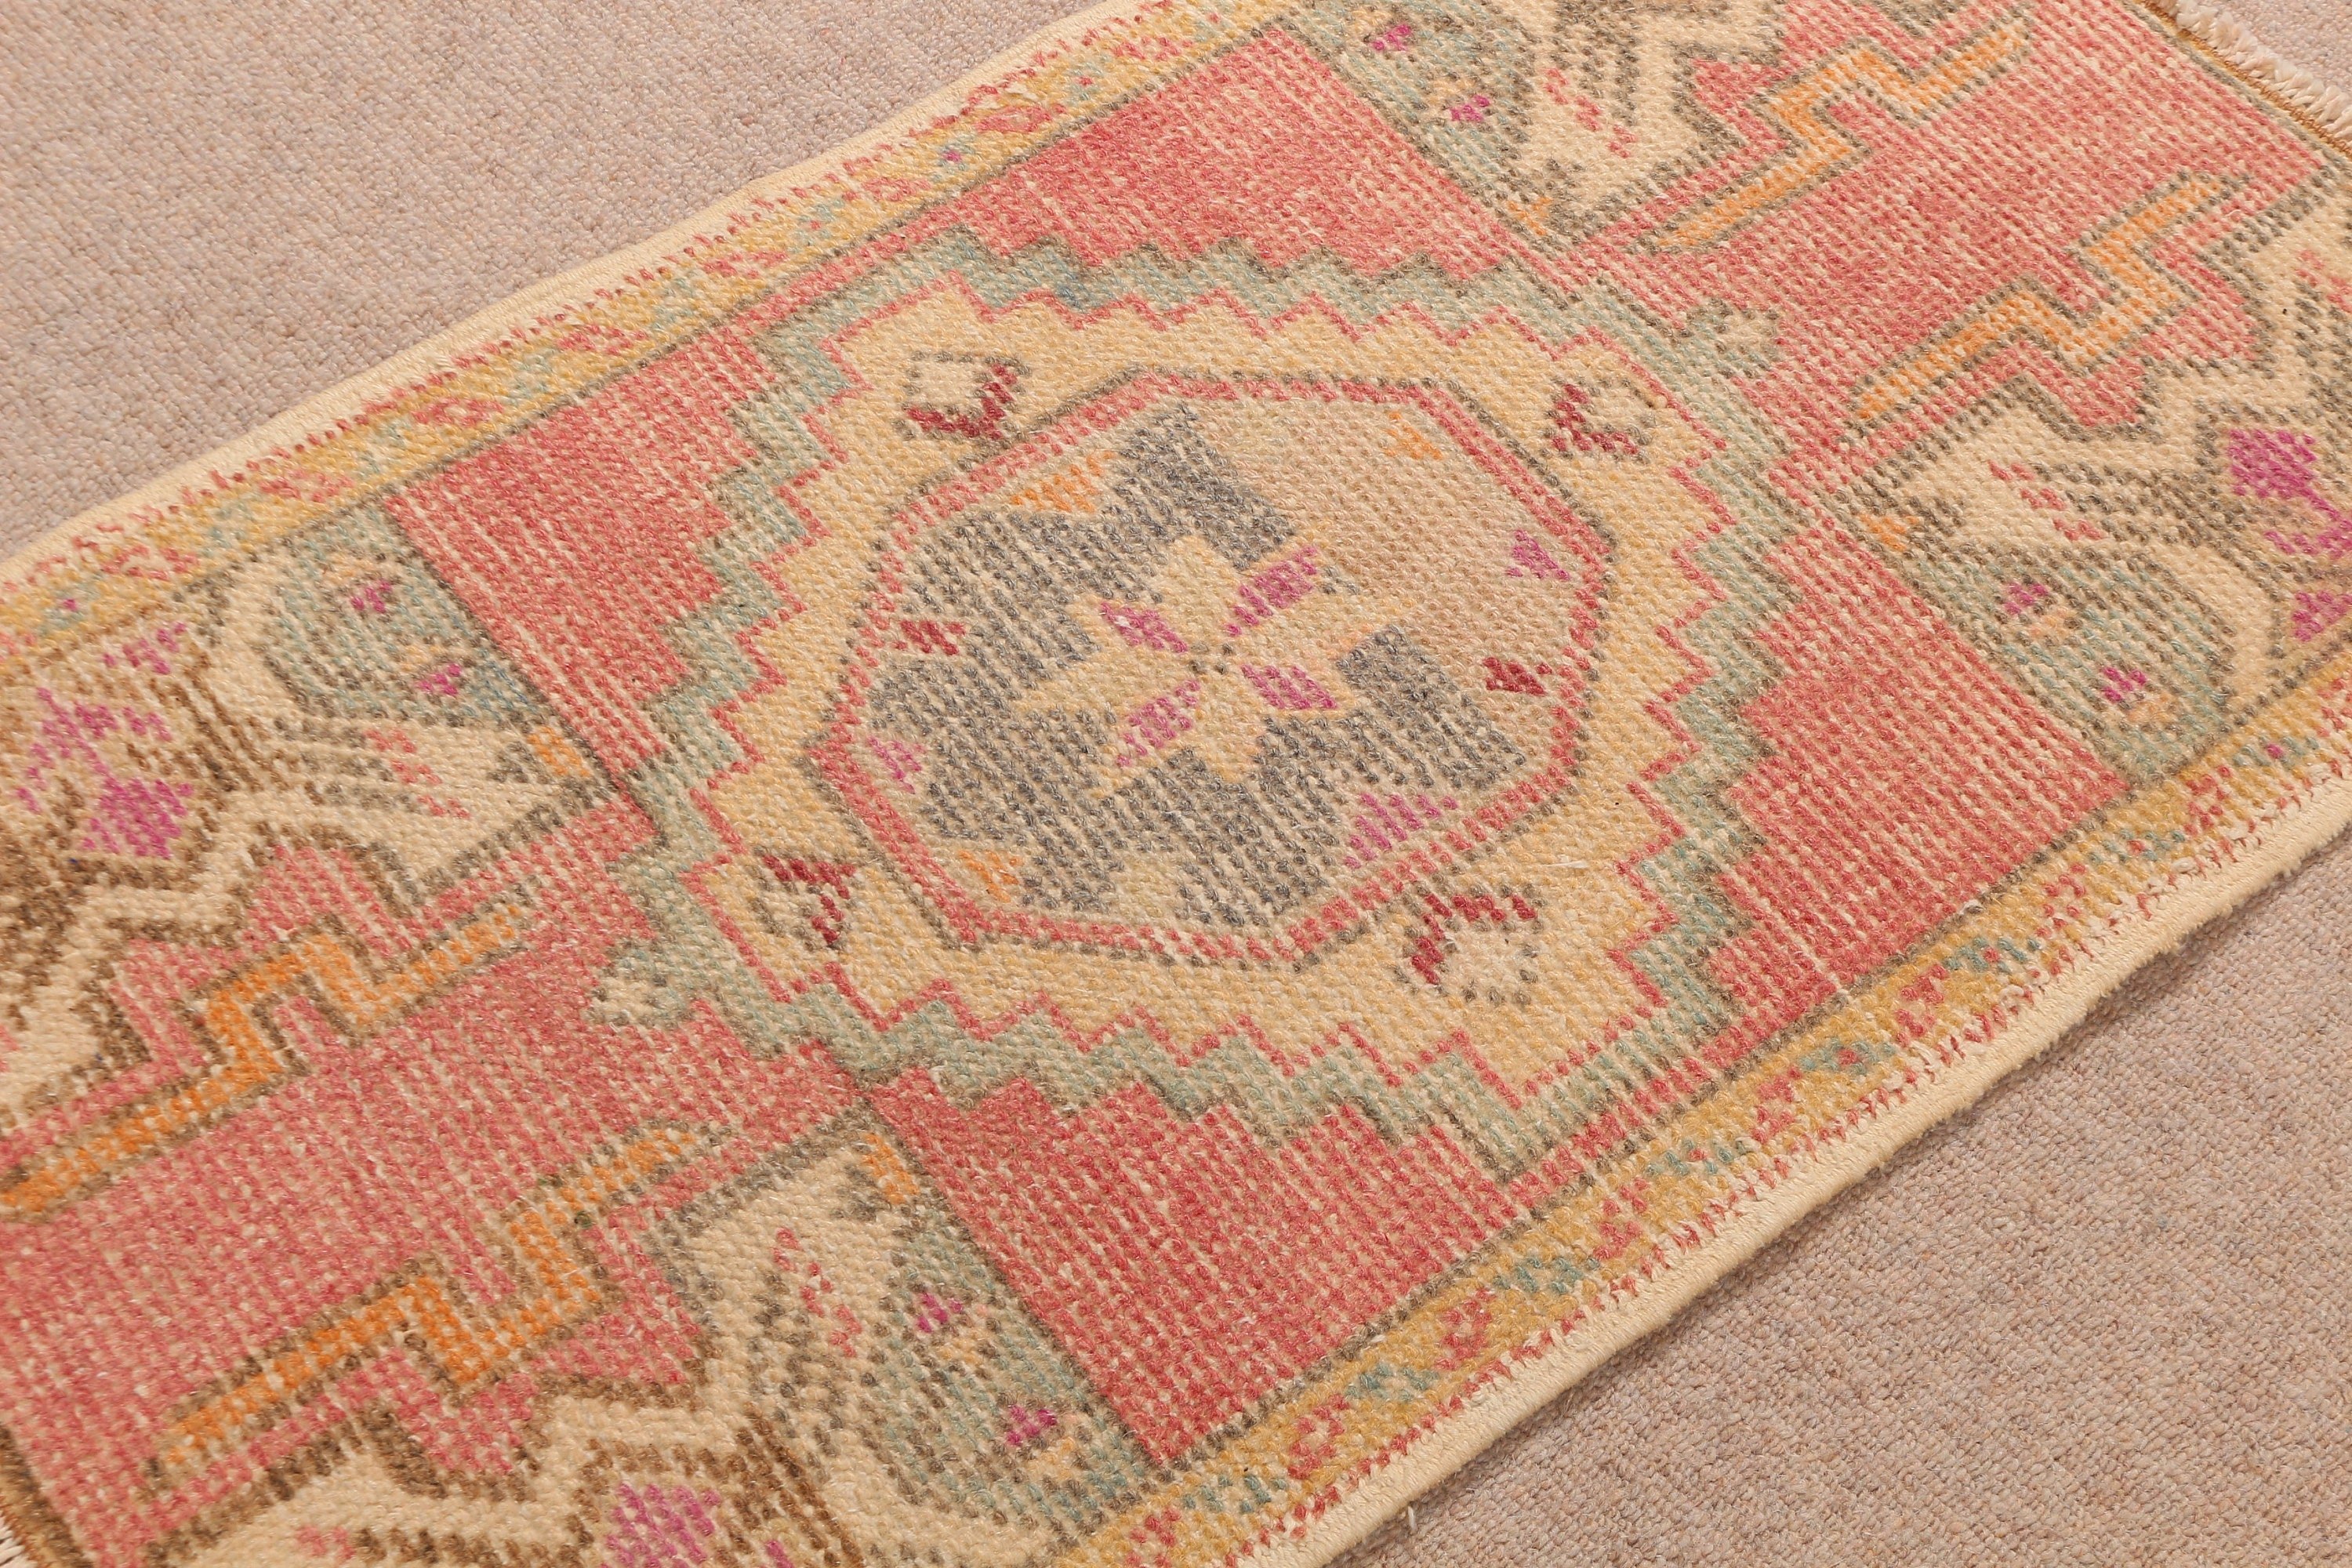 Antique Rugs, Turkish Rugs, Vintage Rug, Rugs for Entry, Pink Floor Rug, Kitchen Rug, Door Mat Rug, 1.6x2.8 ft Small Rugs